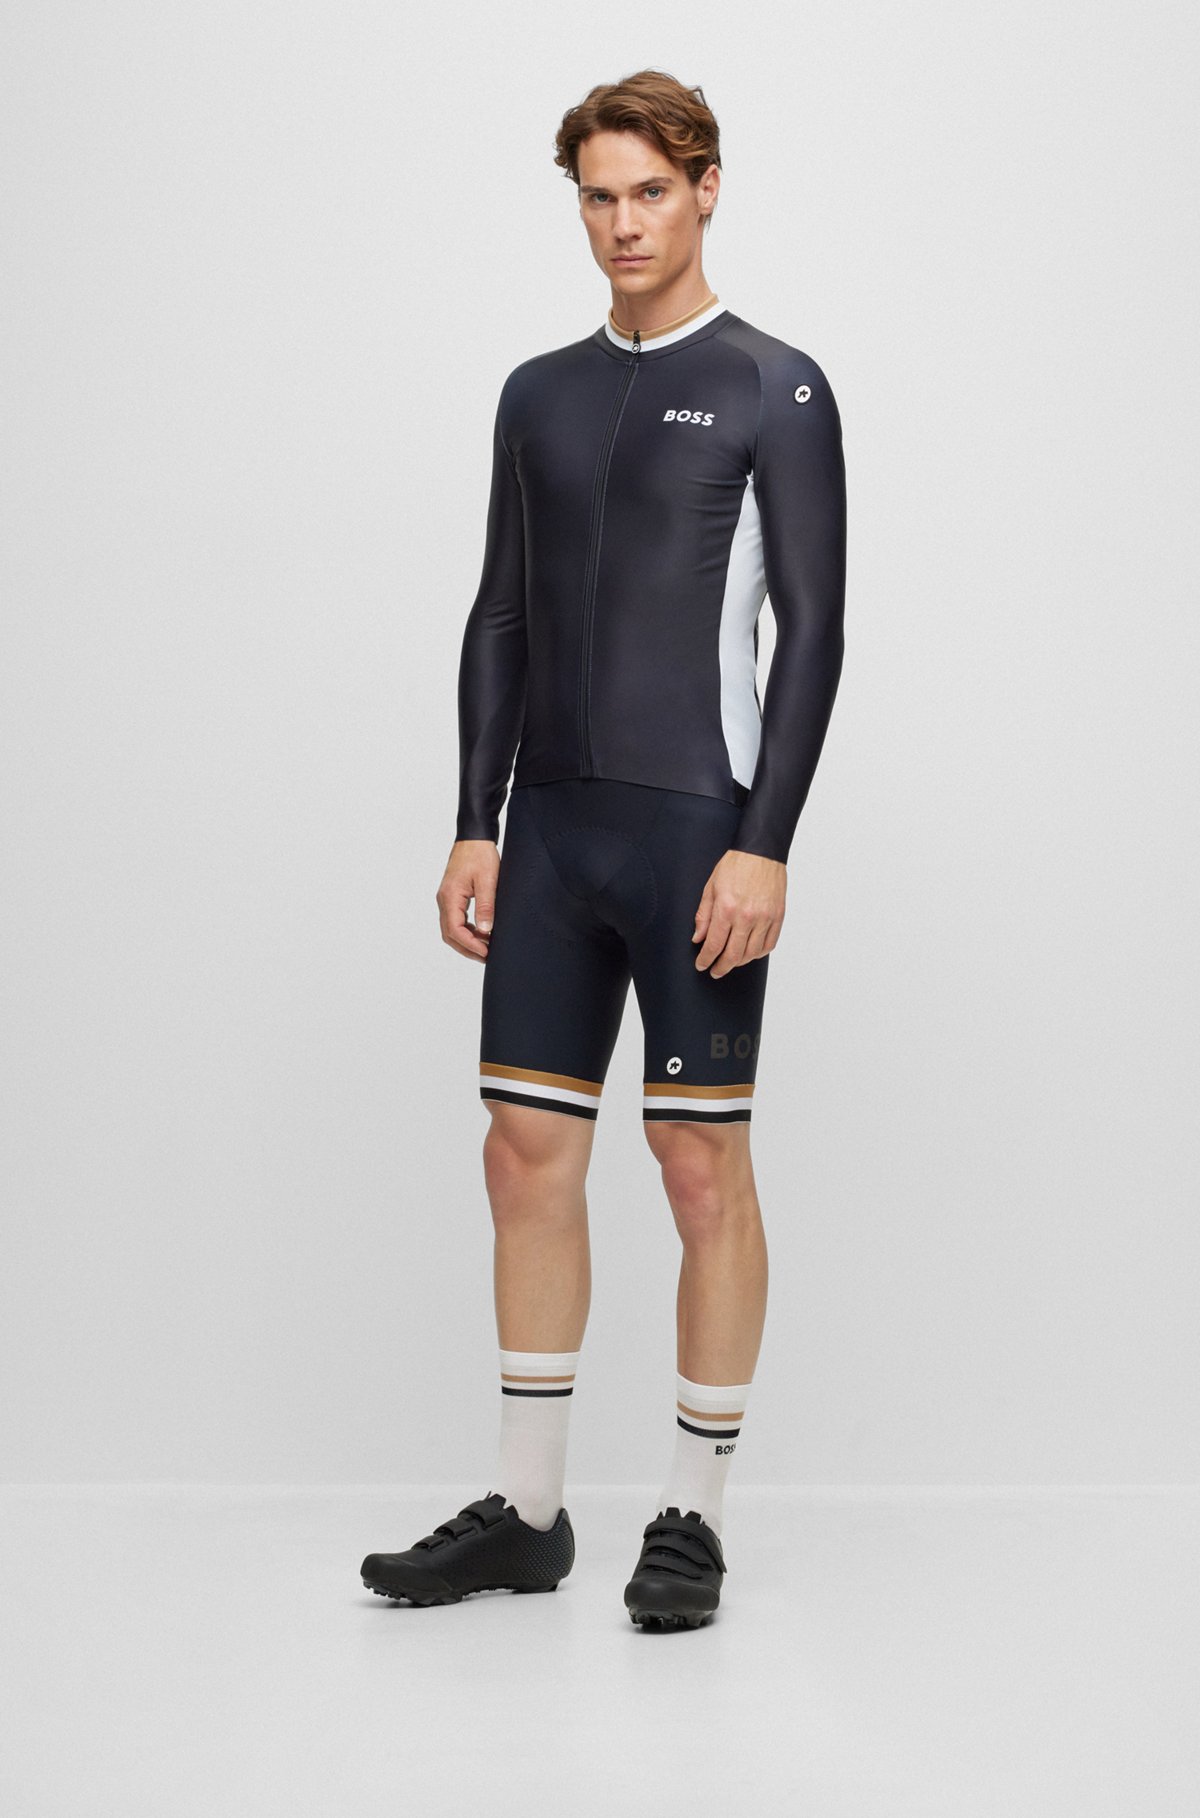  BOSS x ASSOS body-mapped jersey top with branding, Black